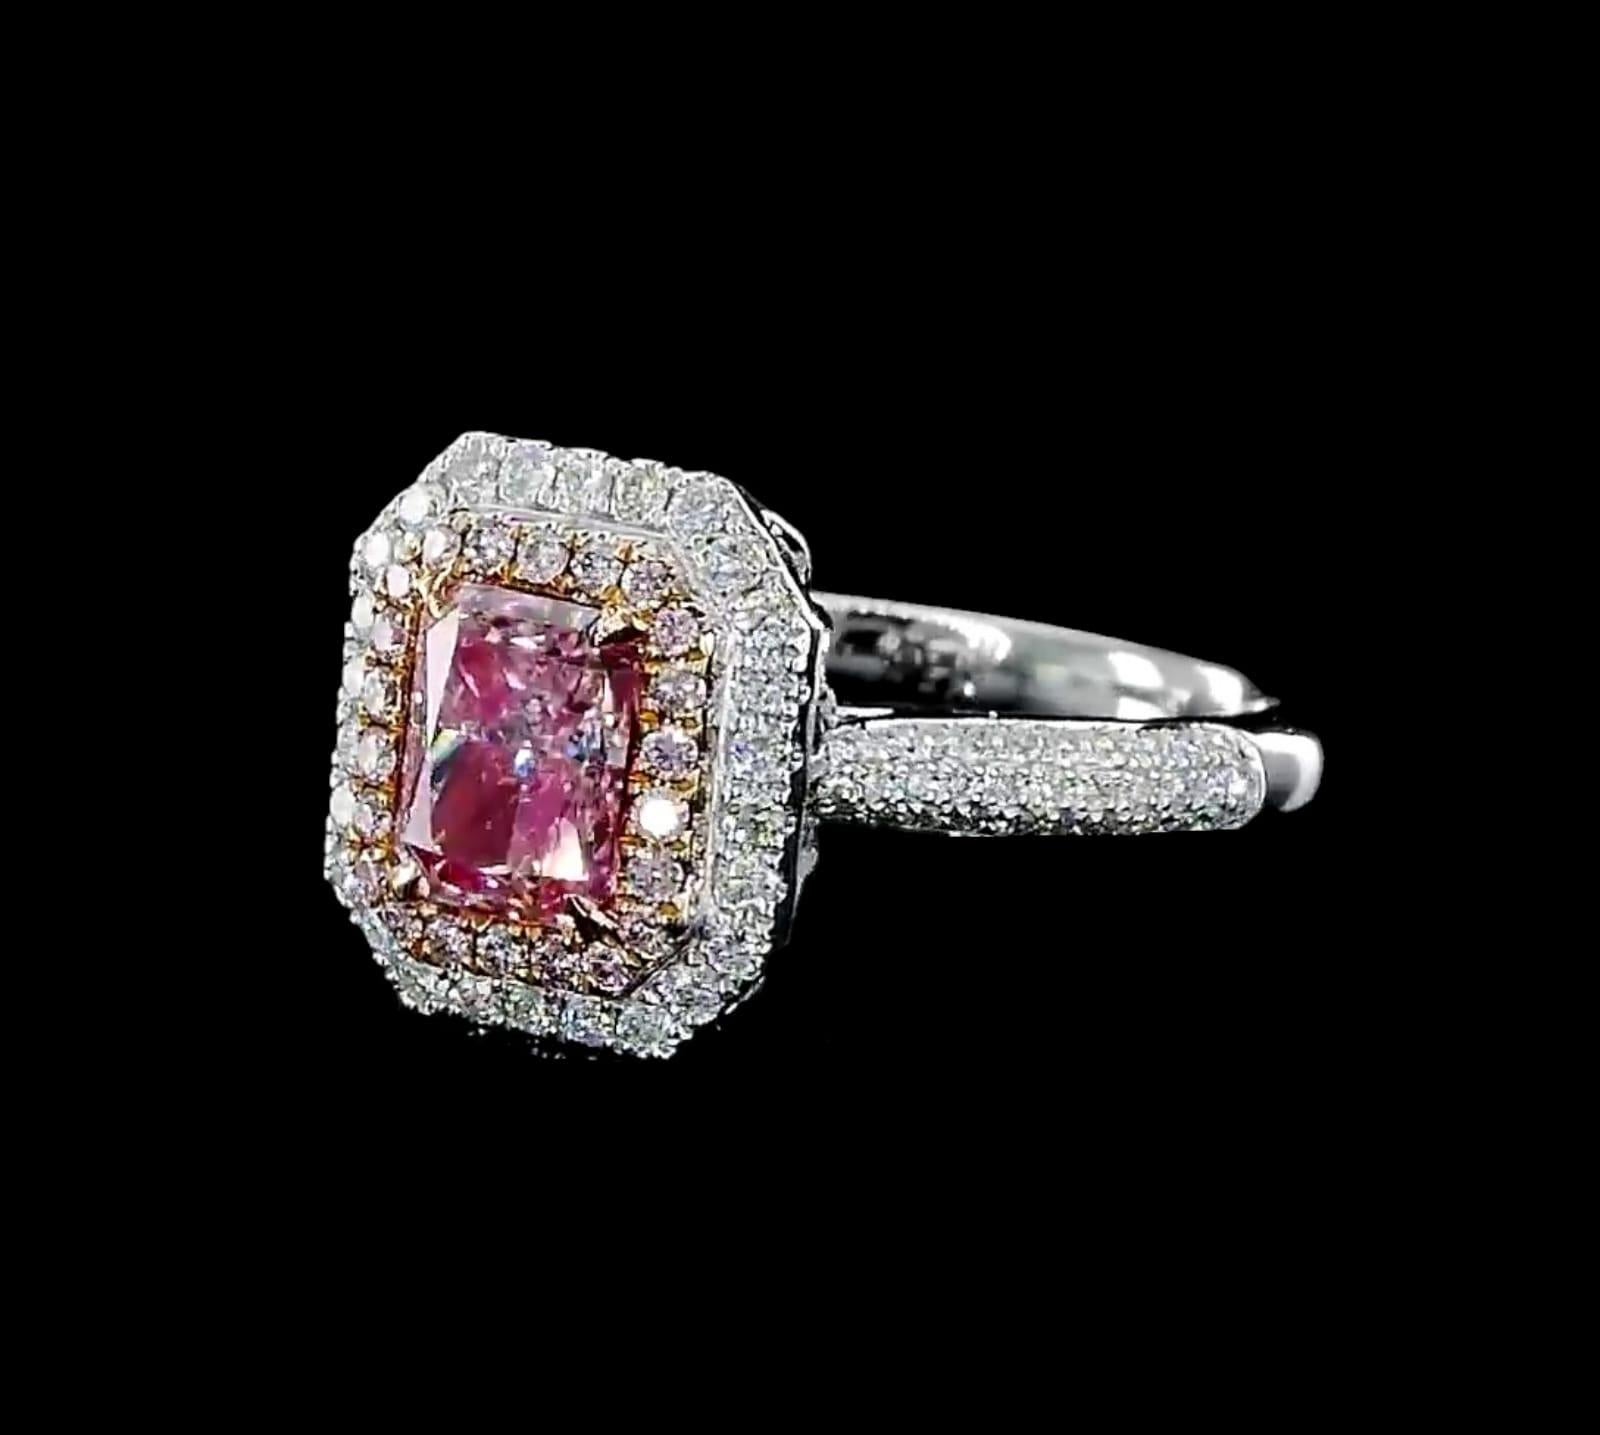 Radiant Cut 1.01 Carat Fancy Pink Diamond Ring SI Clarity AGL Certified For Sale